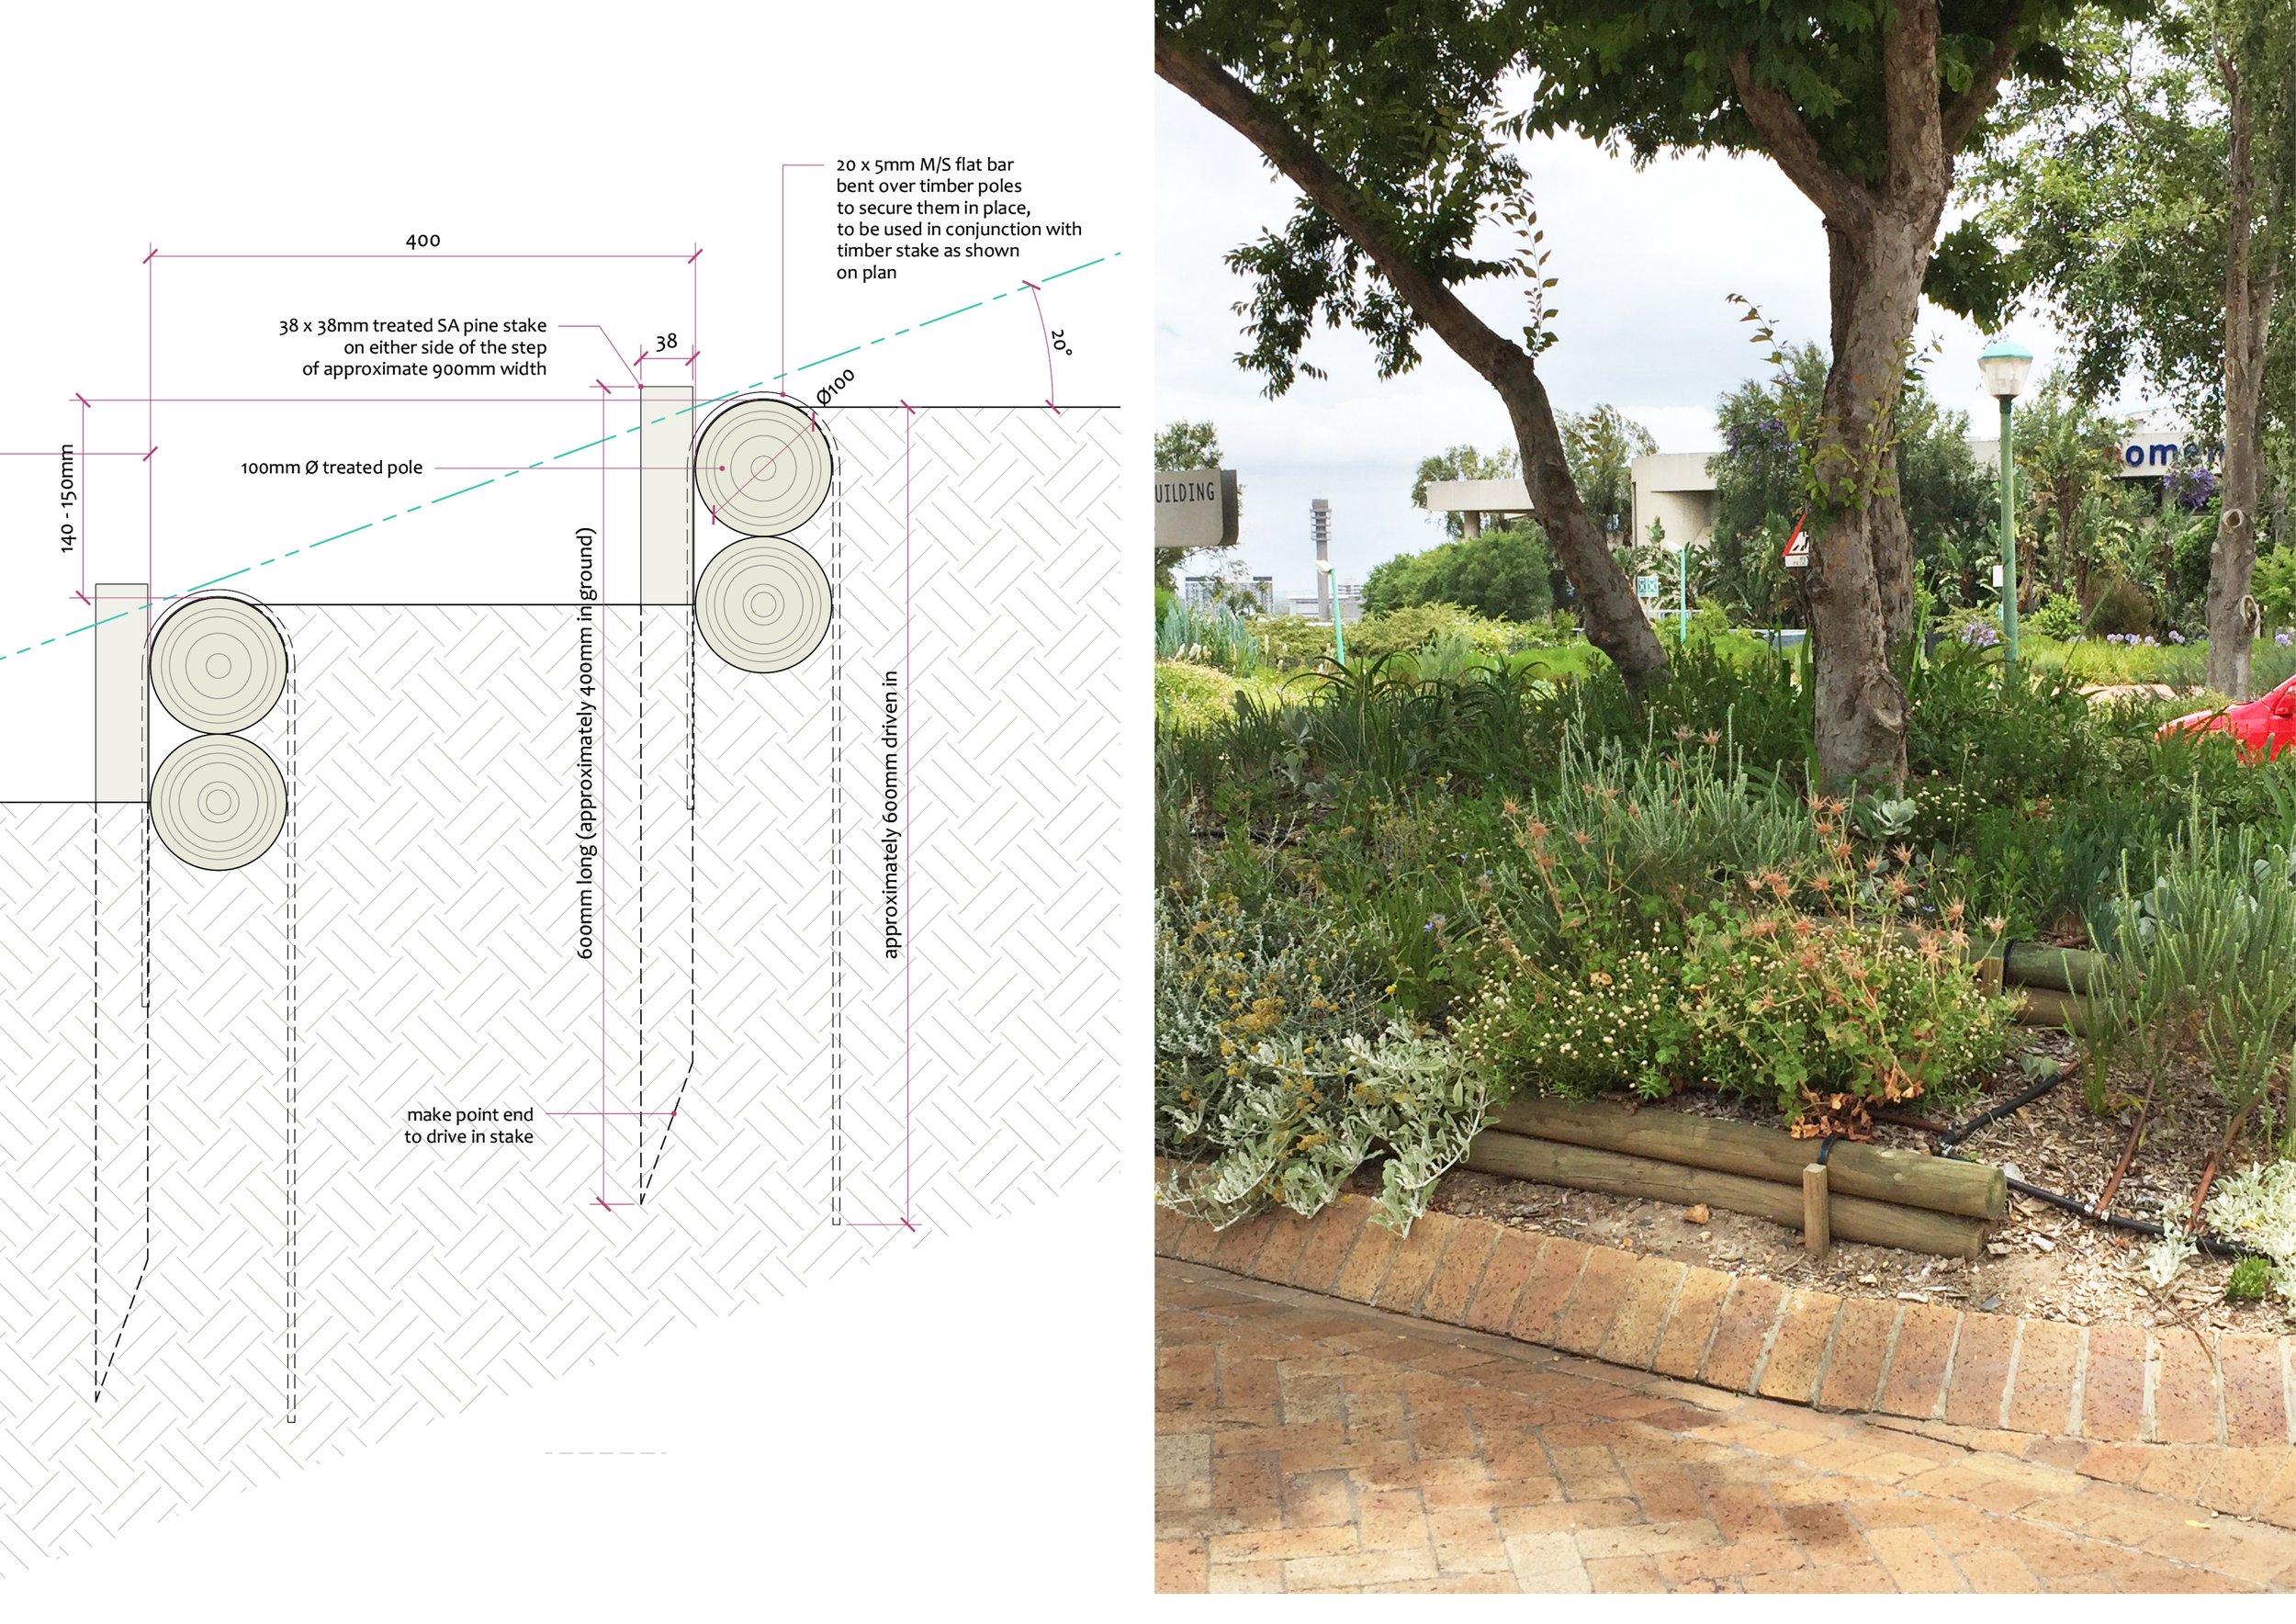  All paths and walkways were carefully detailed in order to create comfortable pedestrian walkways throughout the site 